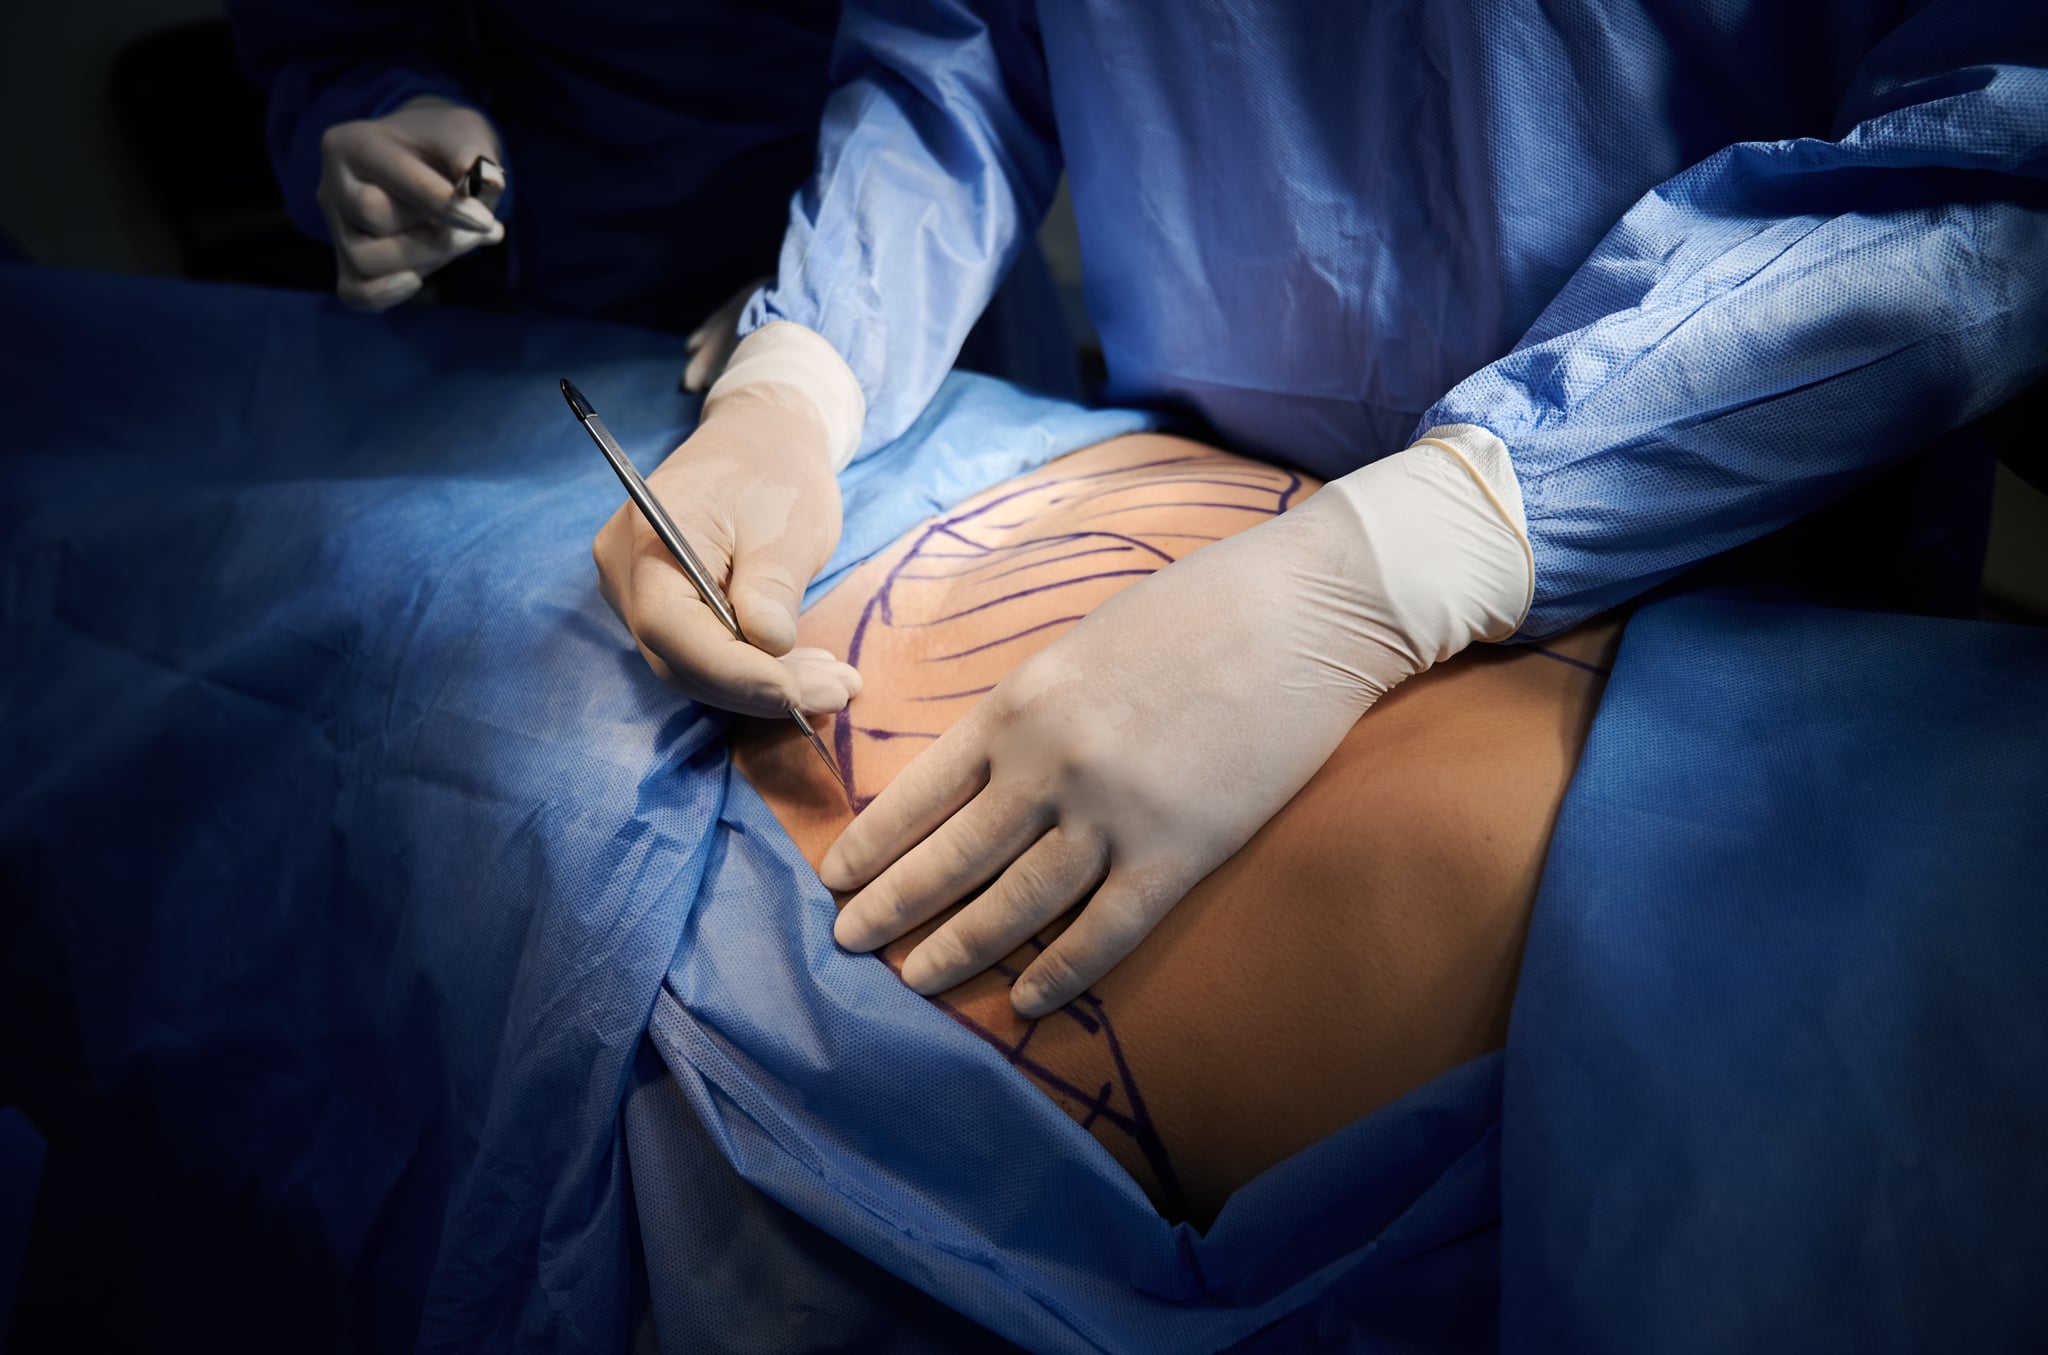 Close up surgeon hands in white sterile gloves using scalpel, doing plastic surgery in operating room. Surgeon cutting patient belly with blue marks on skin. Concept of medicine and abdominoplasty.